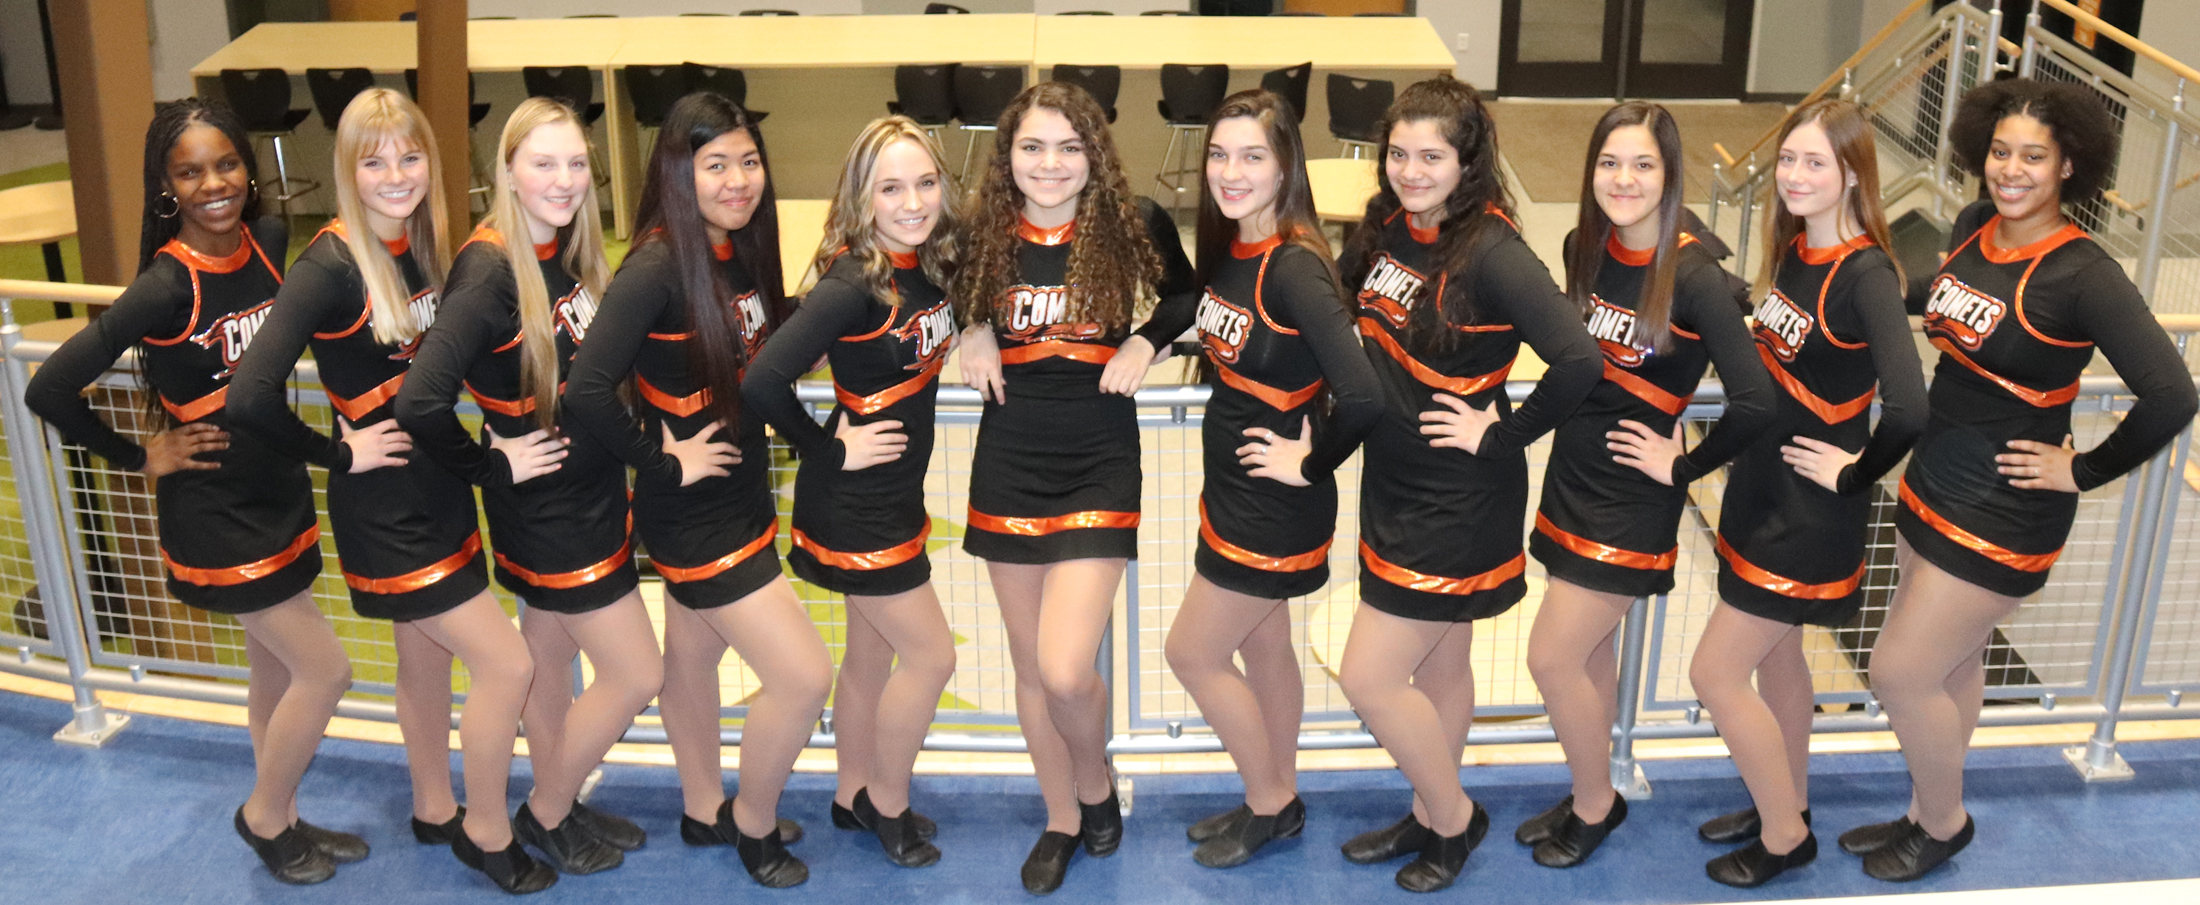 Comet Pom/Dance Team receives D1 rating in Hip-Hop at state competition